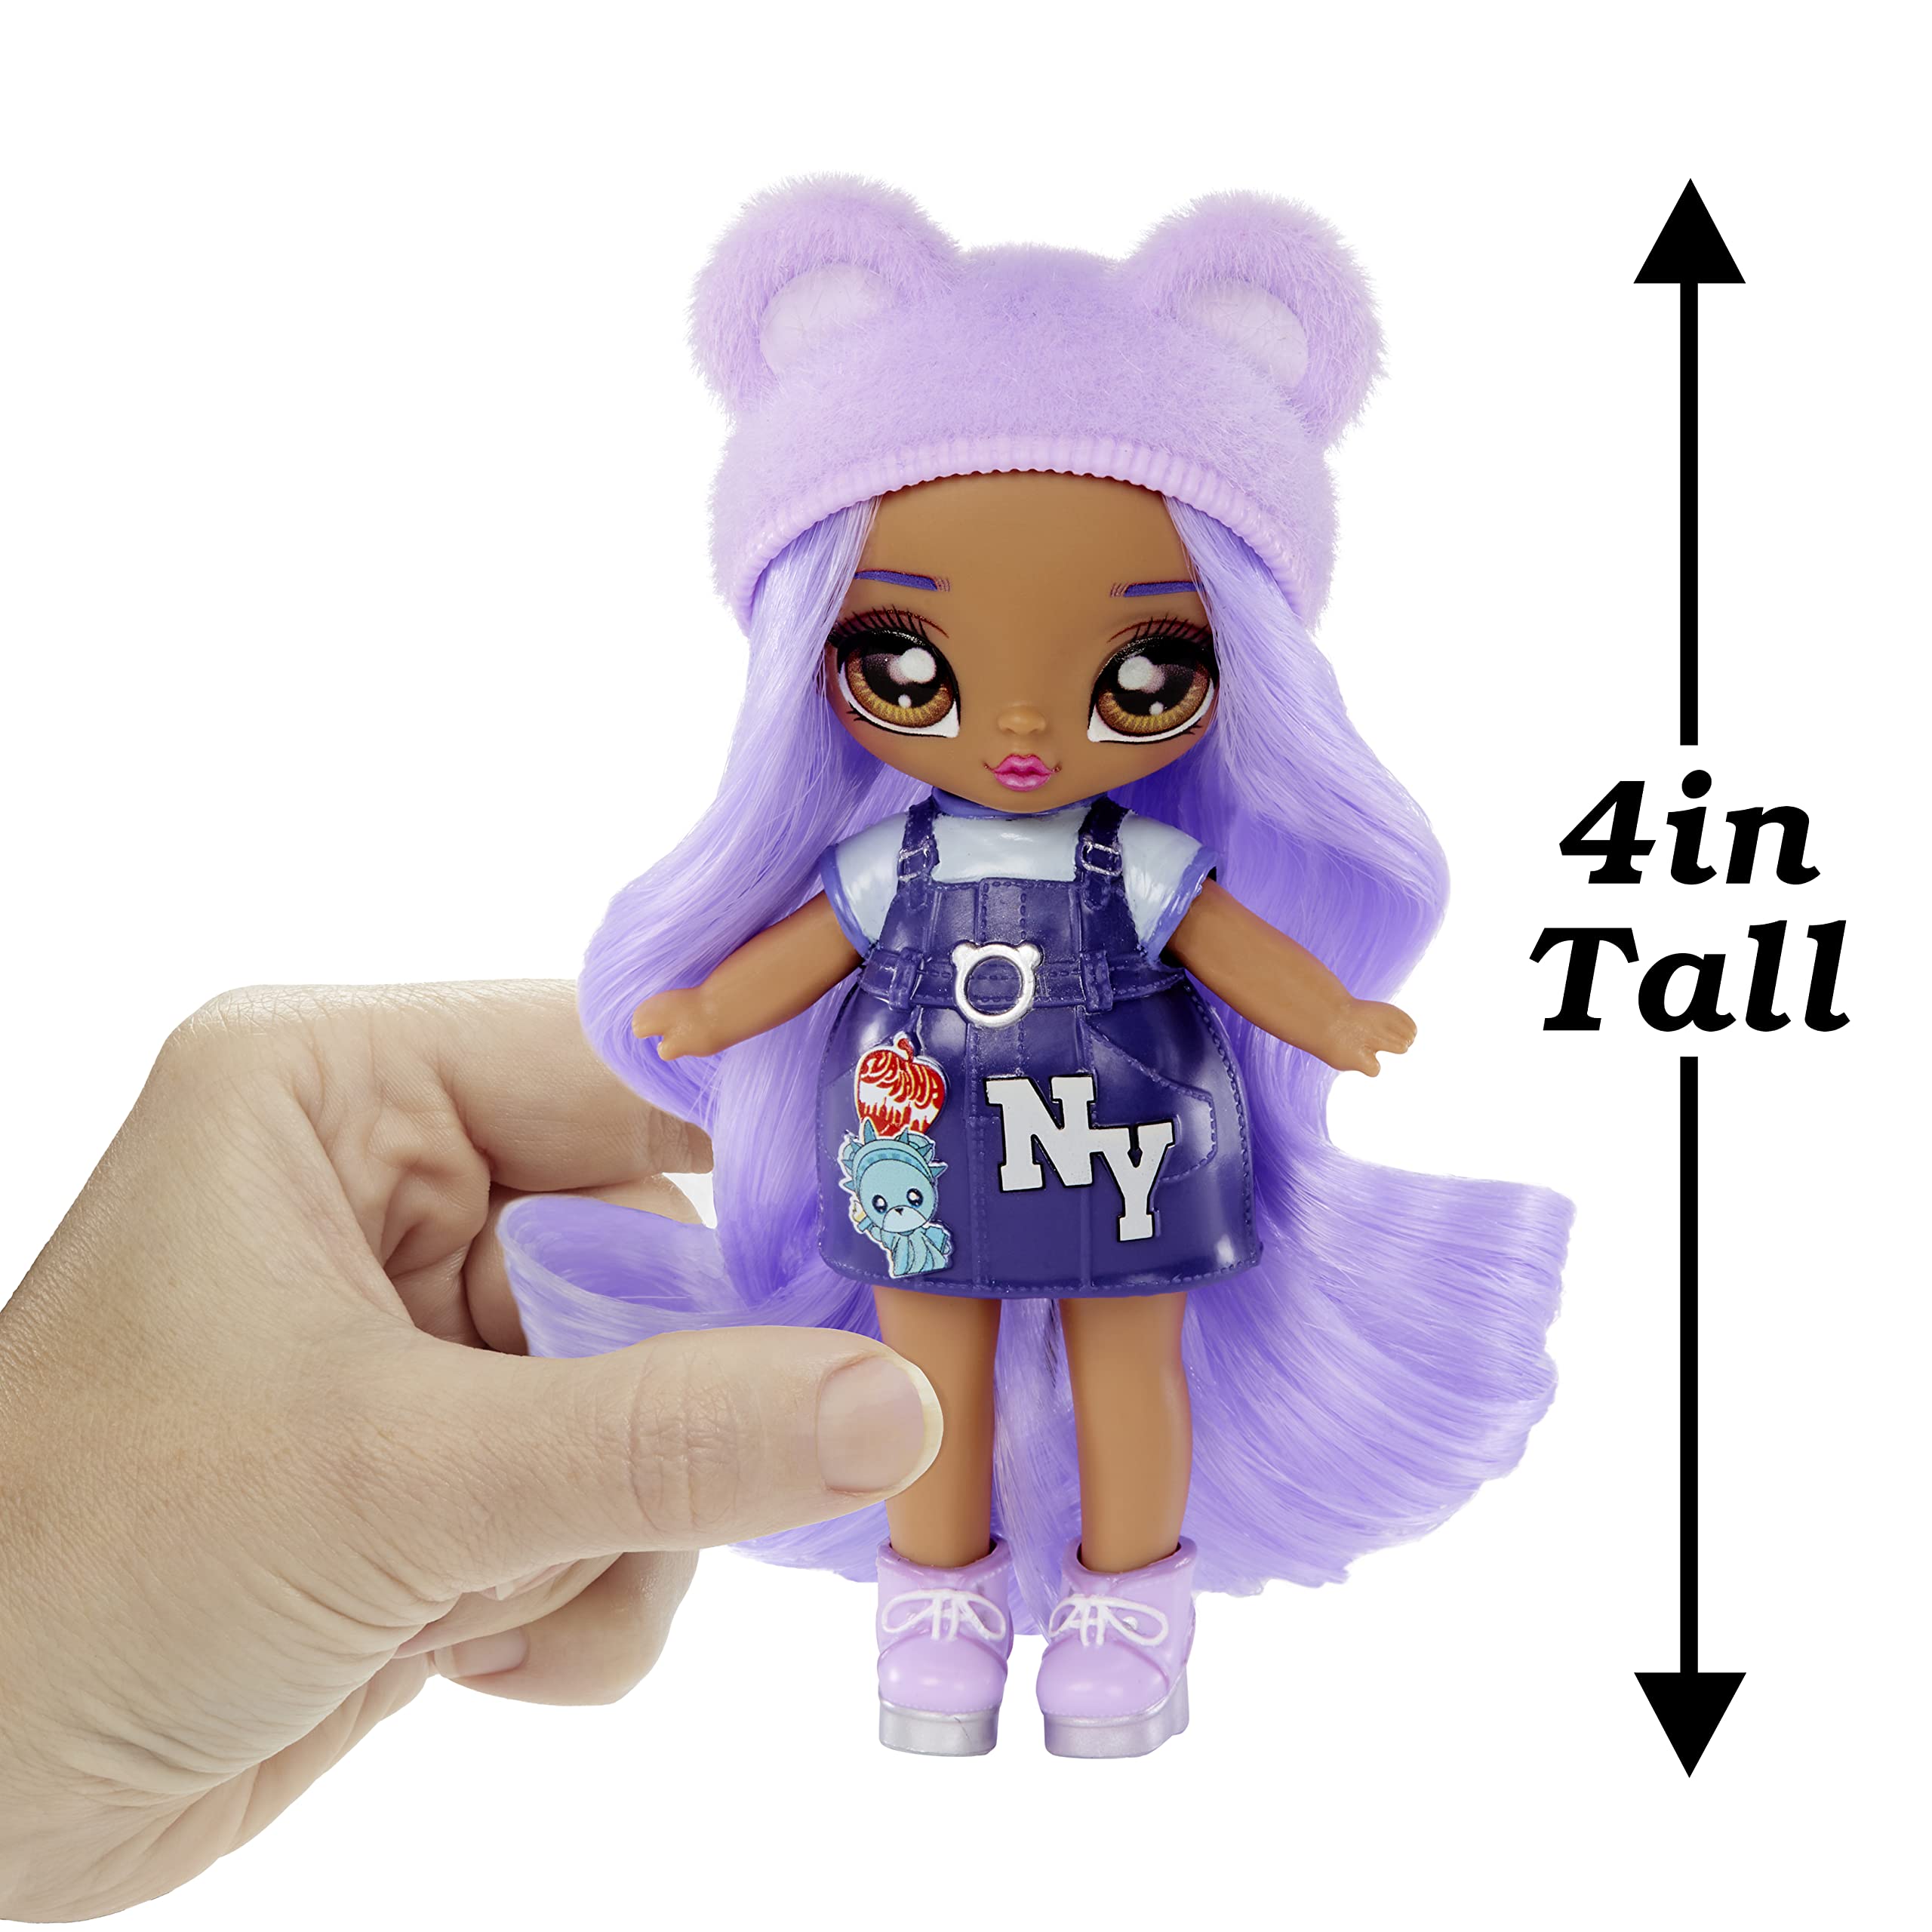 Na! Na! Na! Surprise Mini Backpack Bedroom Lizzy York Fashion Doll, Fuzzy Purple Bear Backpack, Gift for Kids, Ages 5 6 7 8+ Years